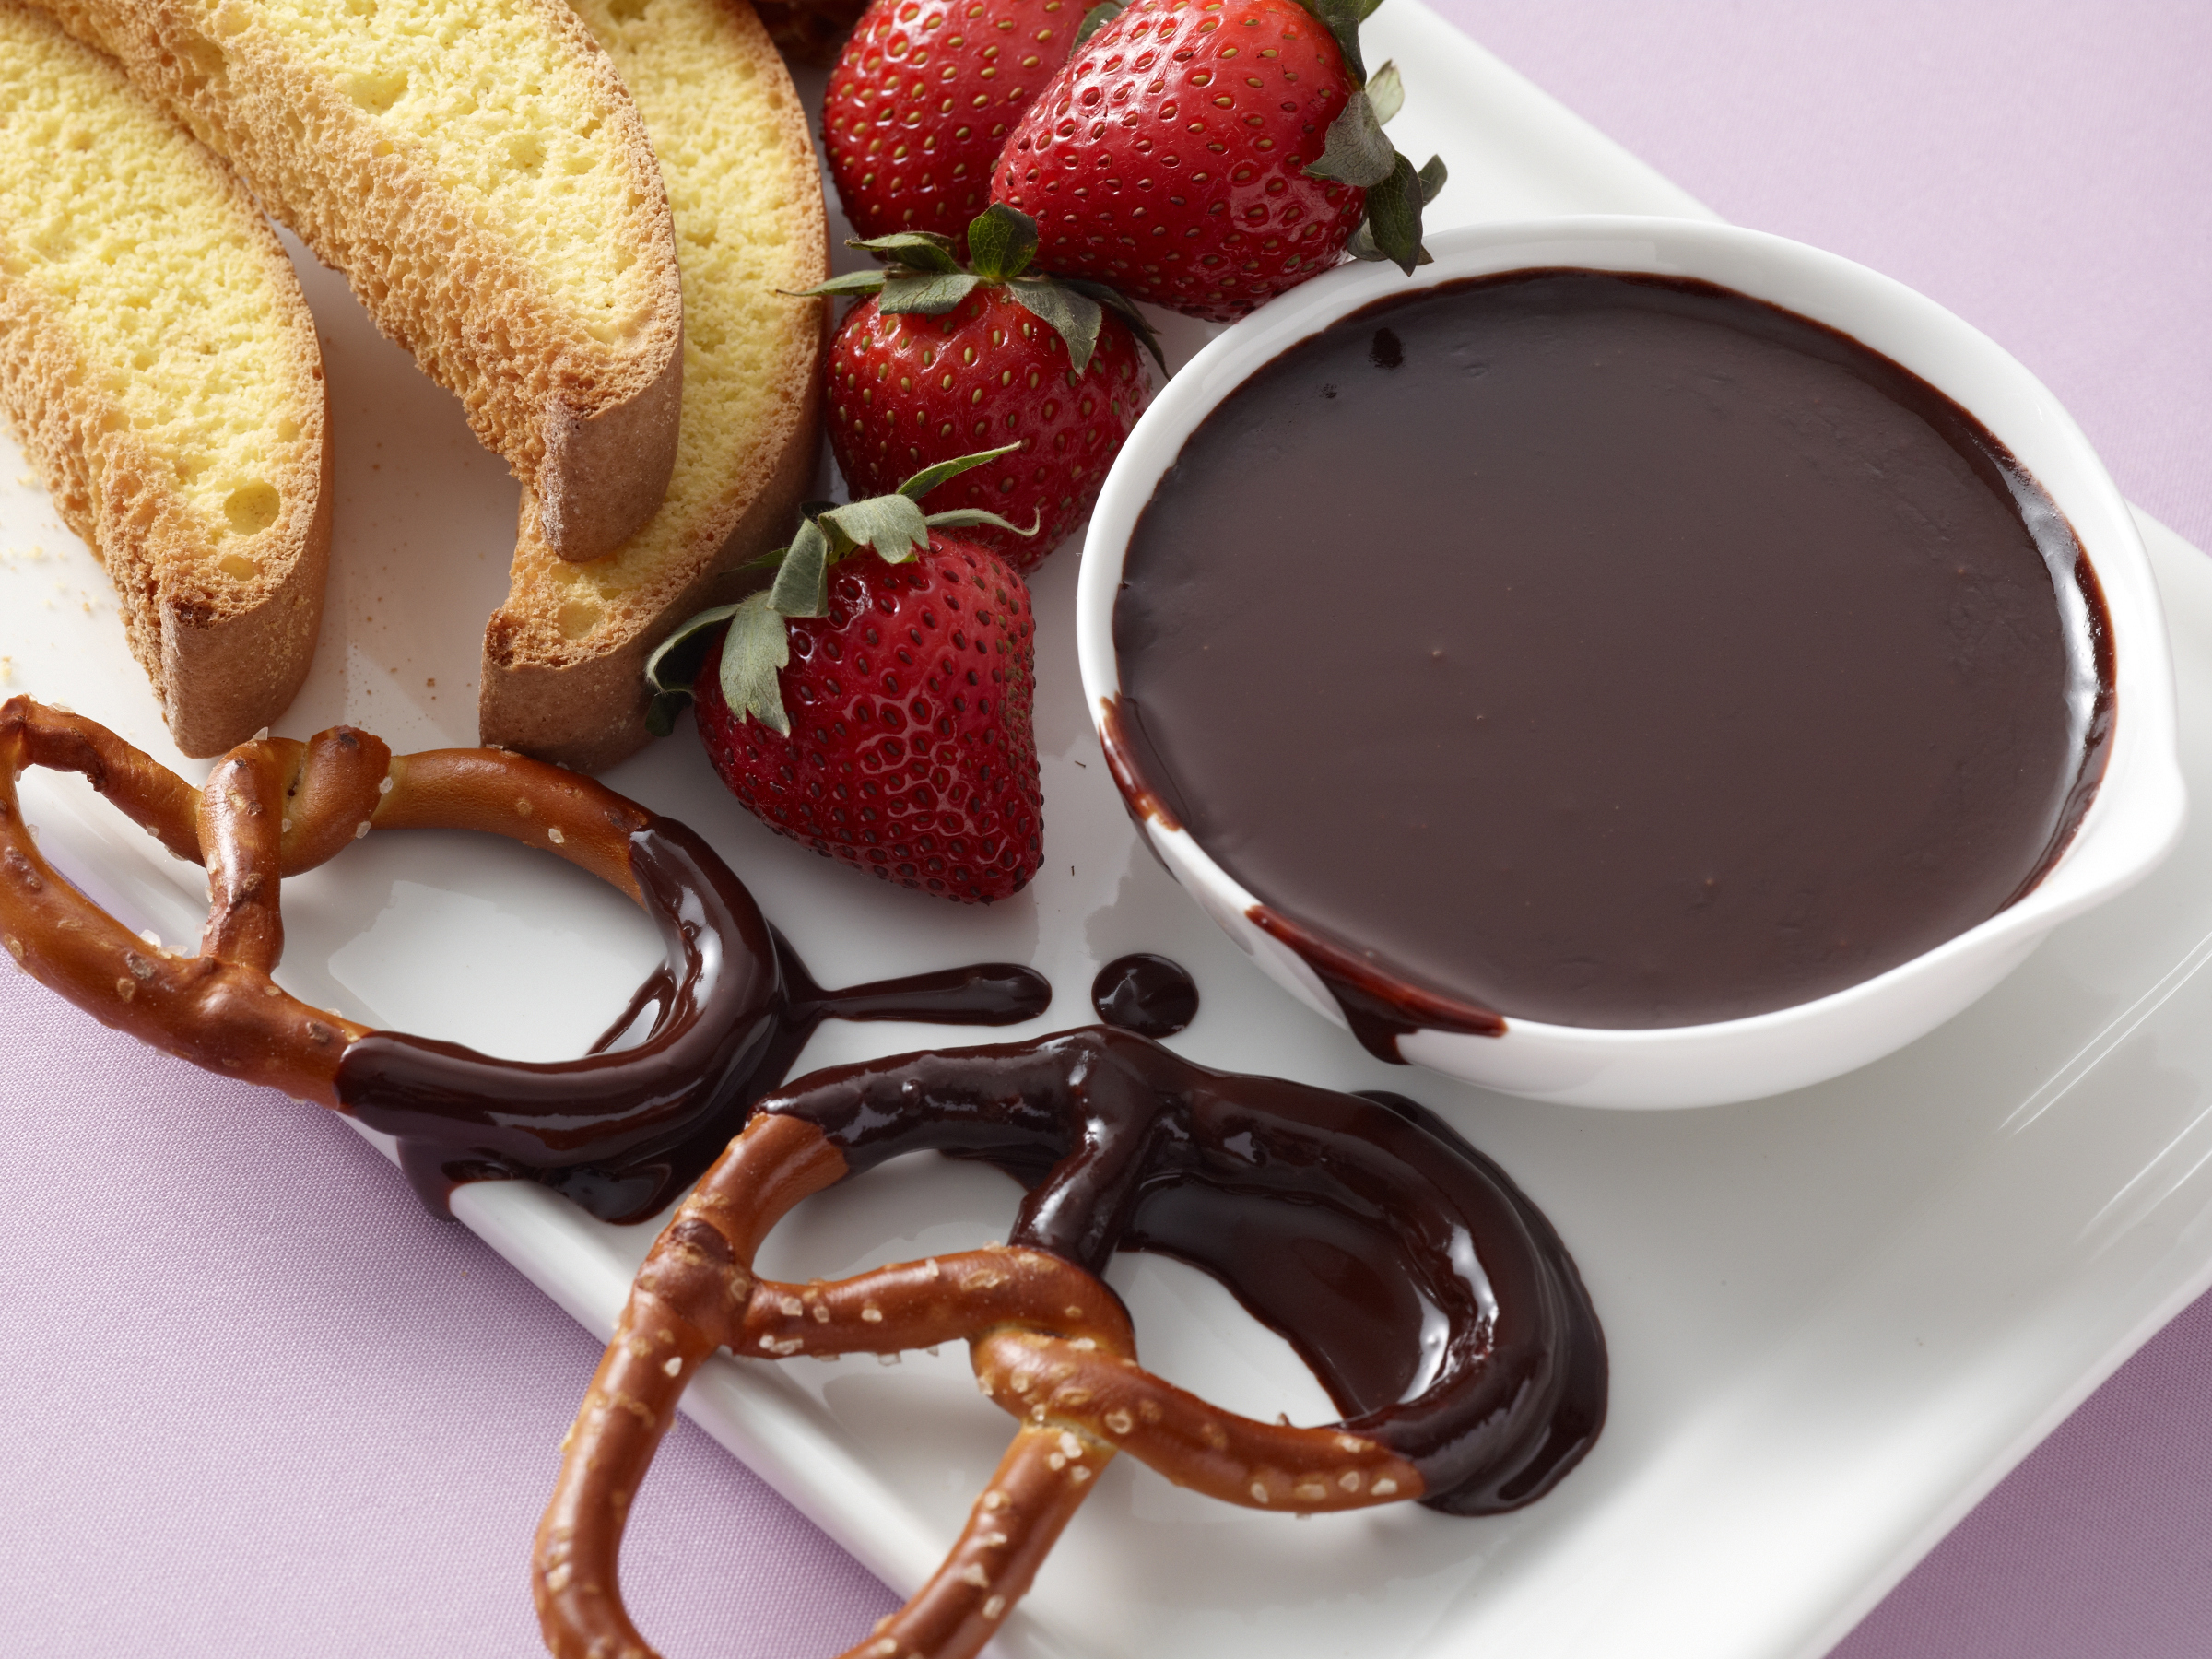 Instant Pot Chocolate Fondue - Melted Chocolate for Dipping Food & Fruit